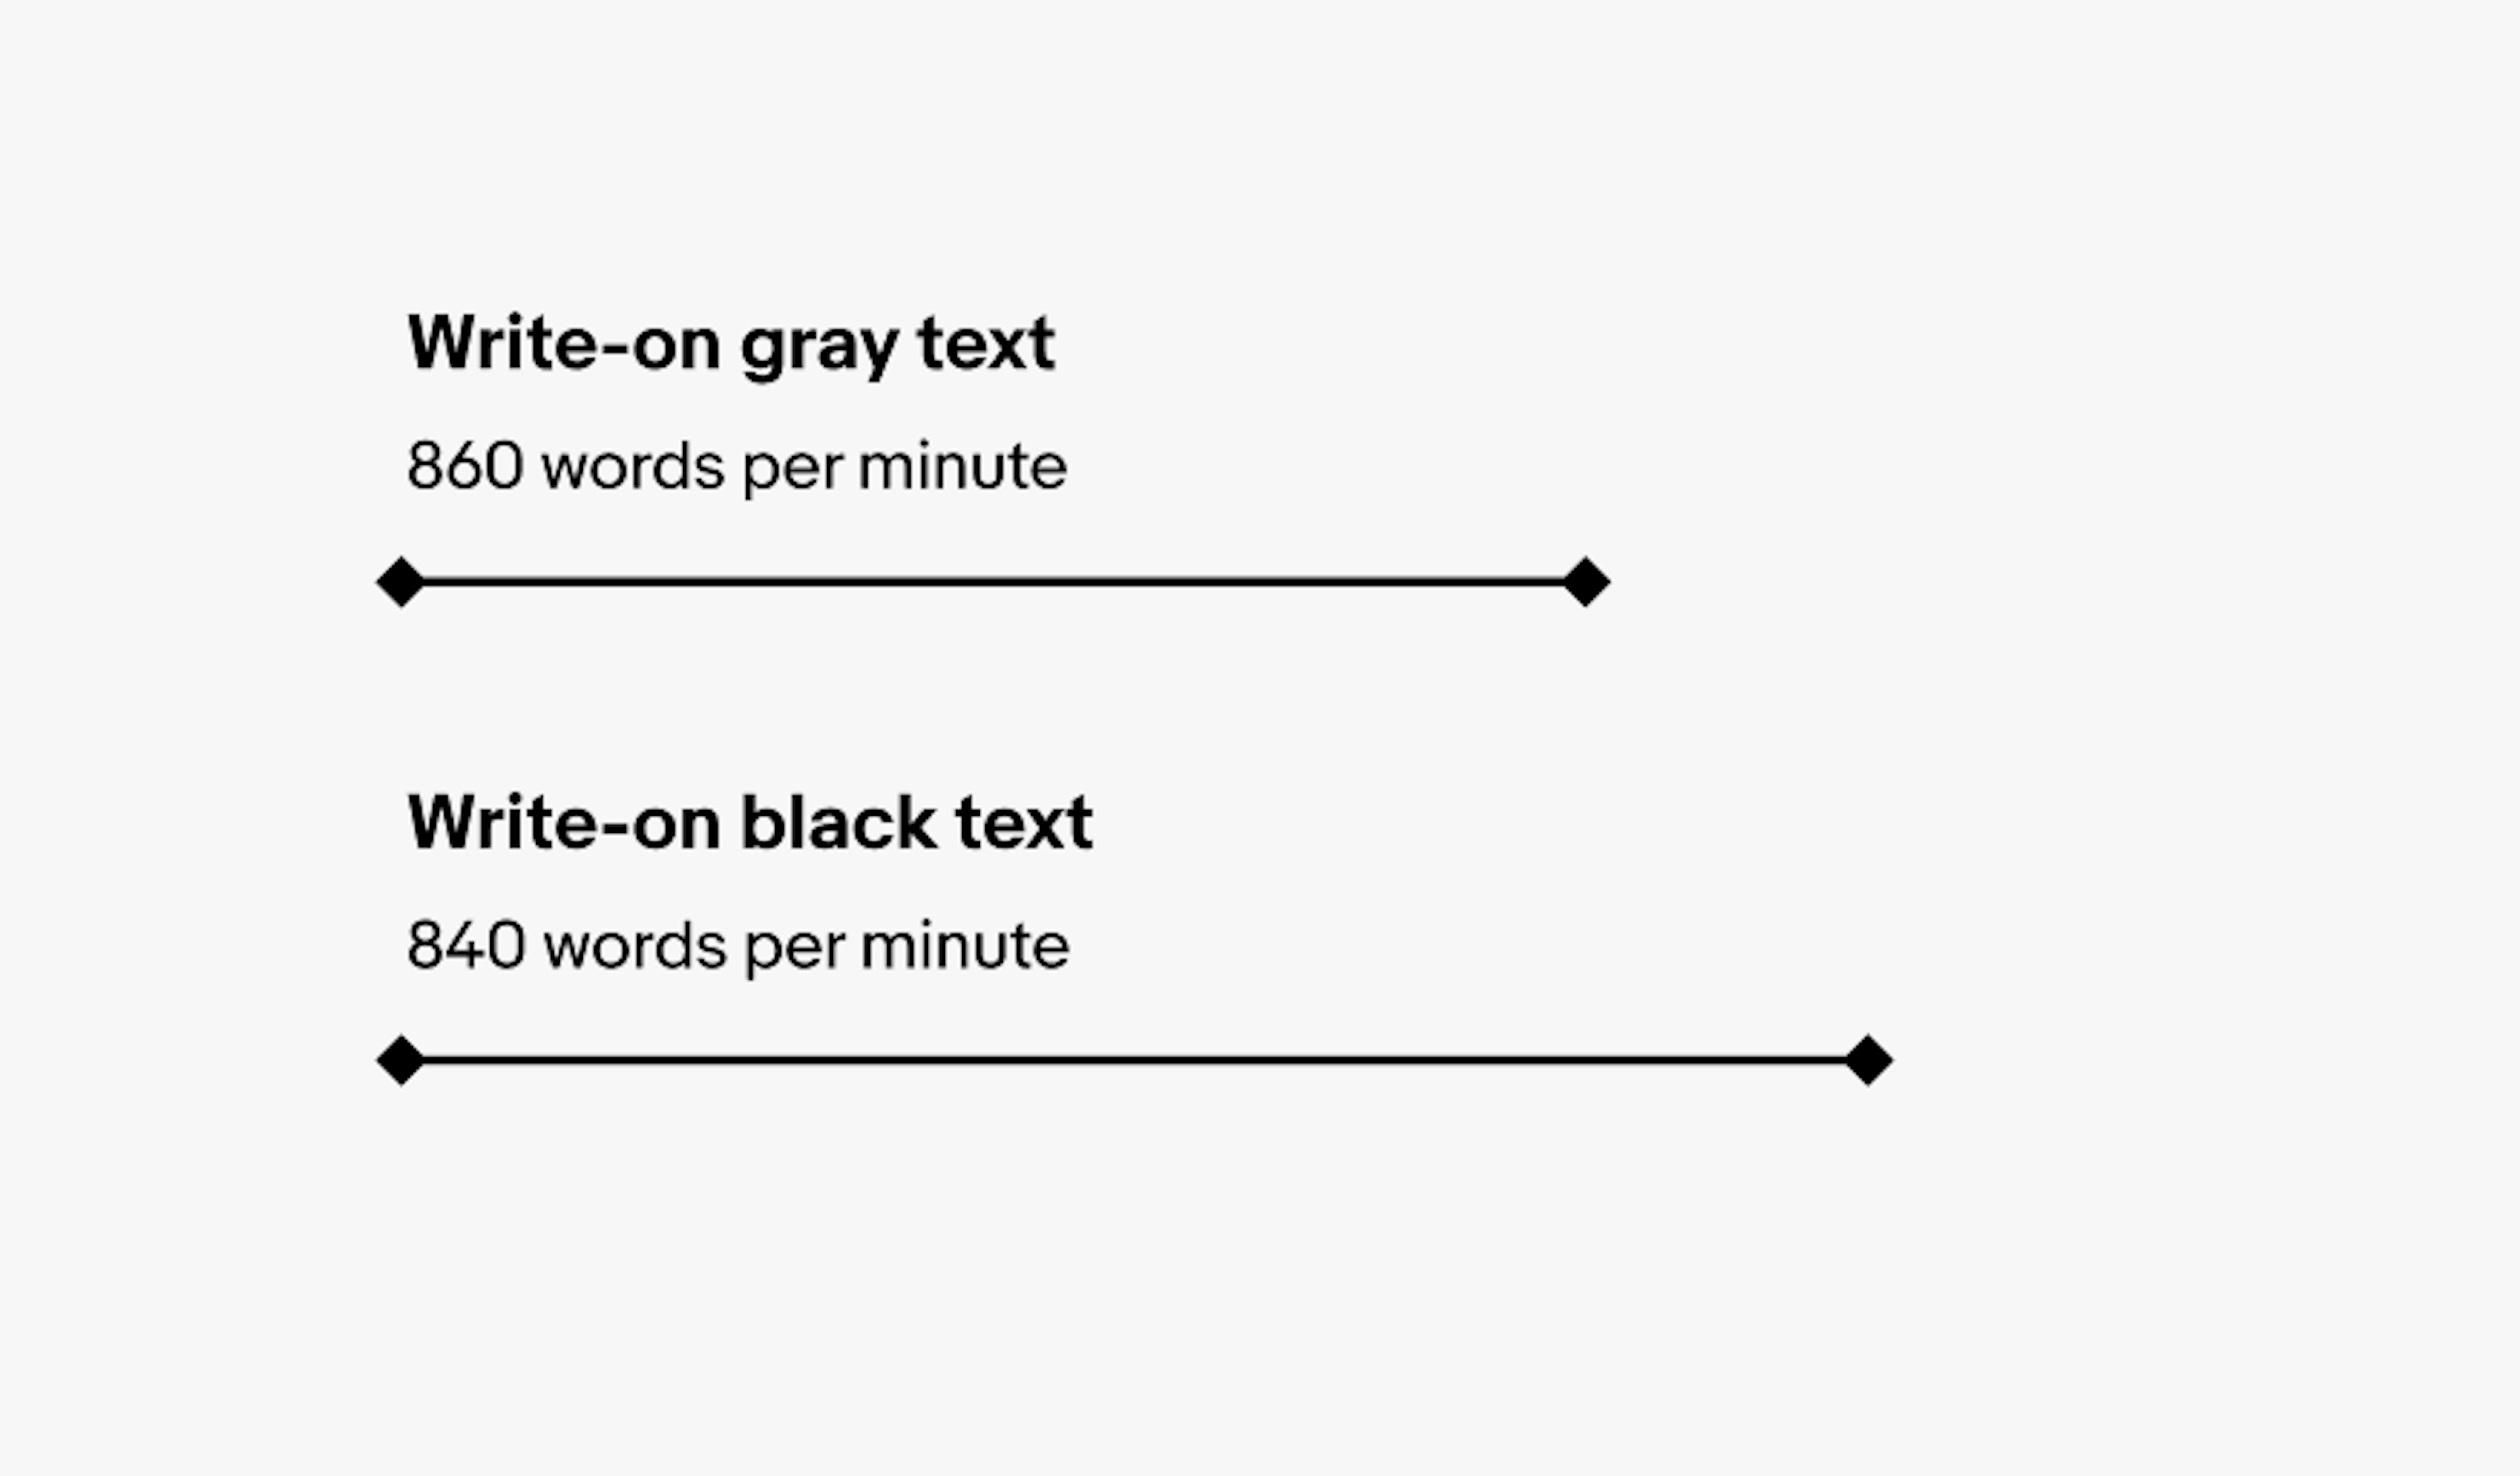 Two motion timeline graphics. The first is for write-on gray text 860 words per minute. The second is for write-on black text 840 words per minute.